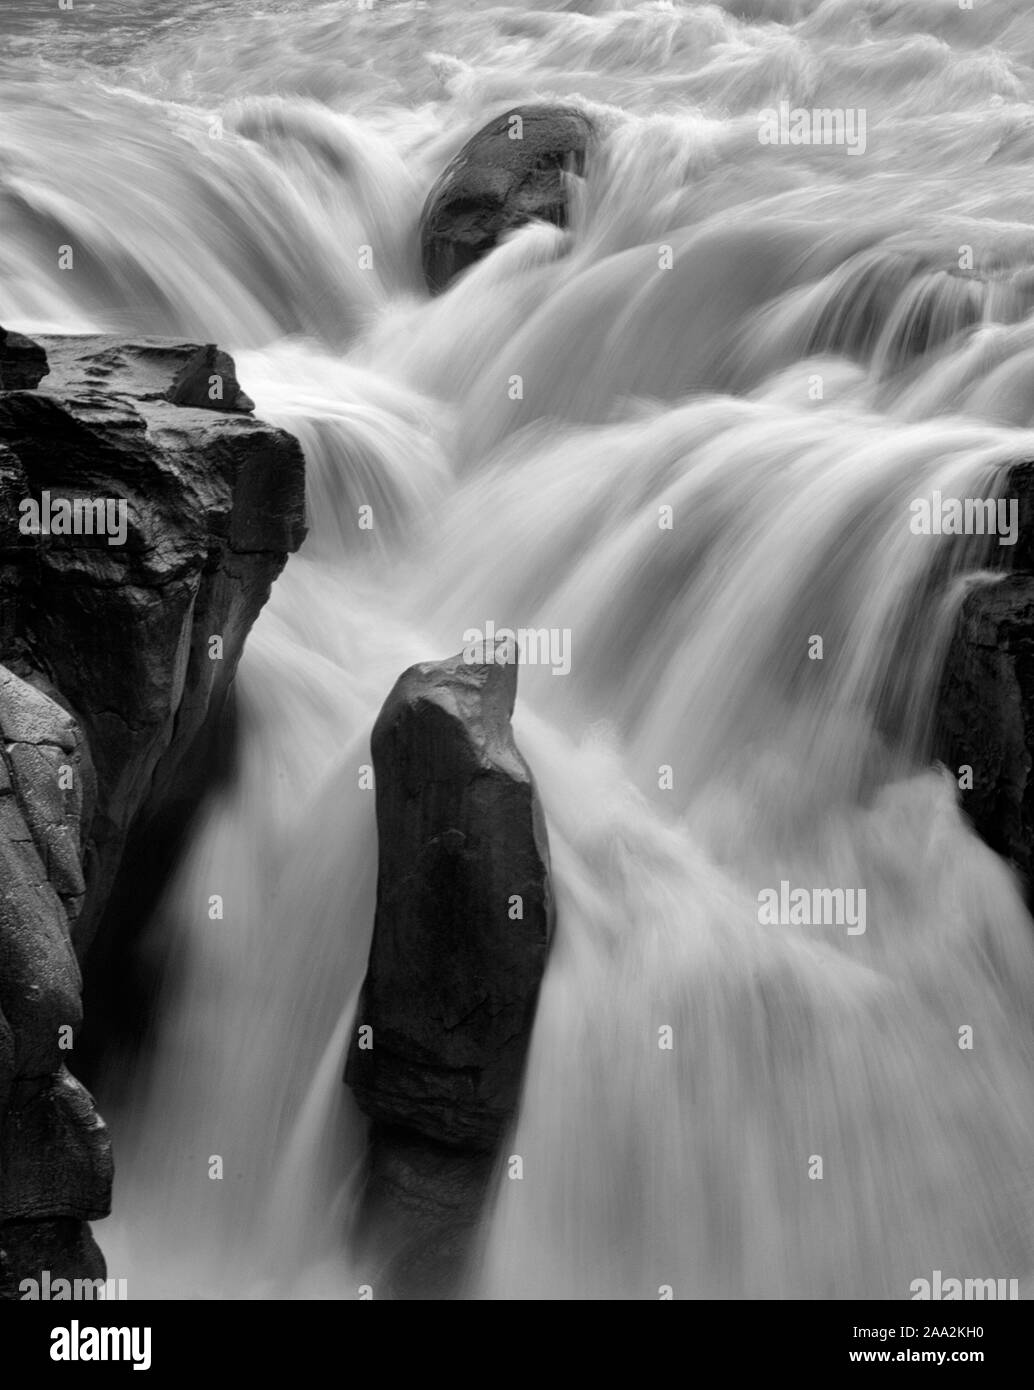 Slow exposure of a raging waterfall Stock Photo